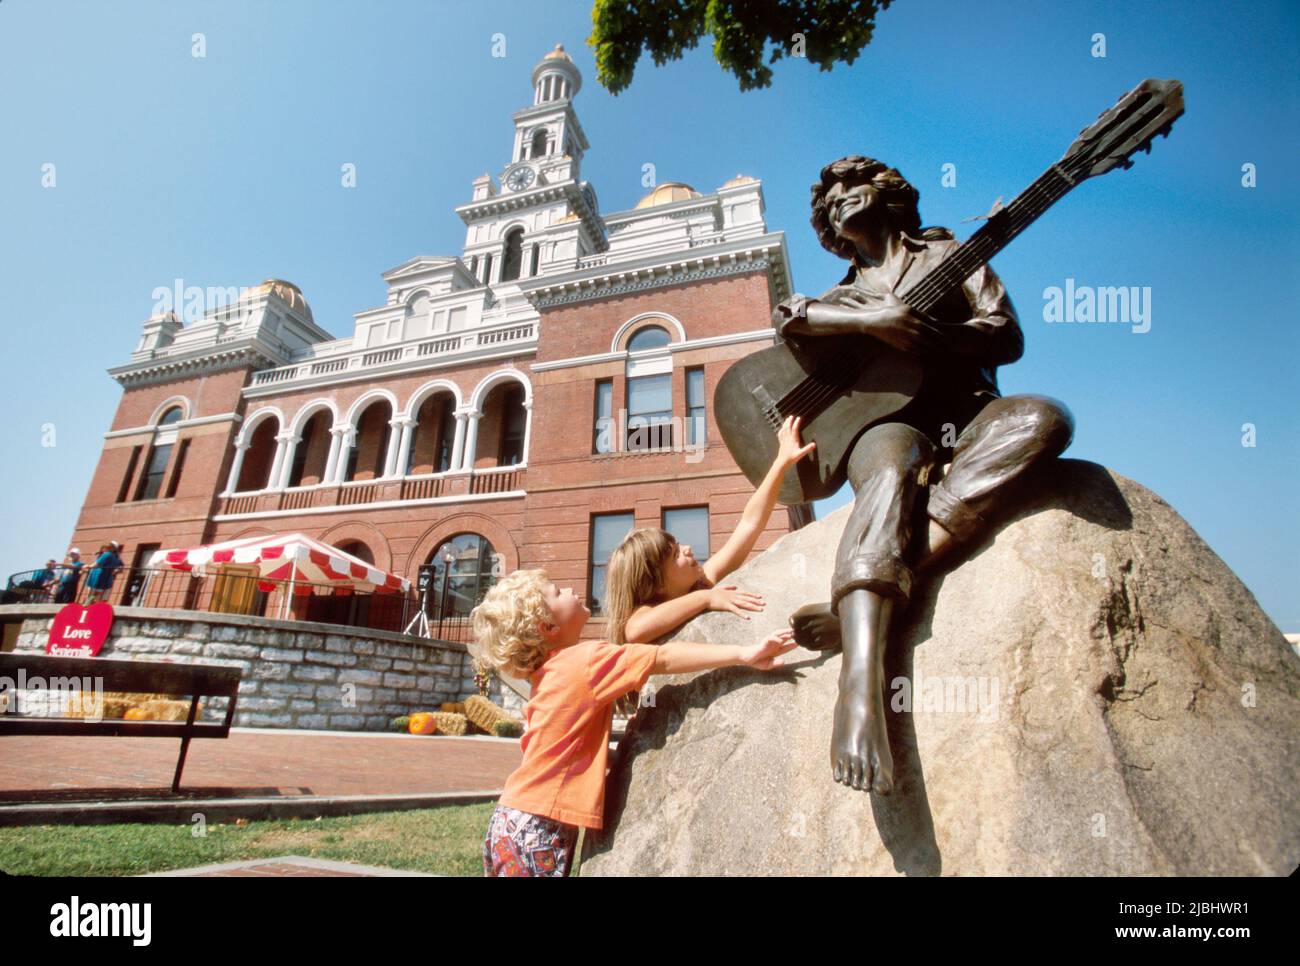 Sevierville Tennessee,Dolly Parton statue public art memorial,hometown country music singer Sevier County Courthouse 1895 Stock Photo